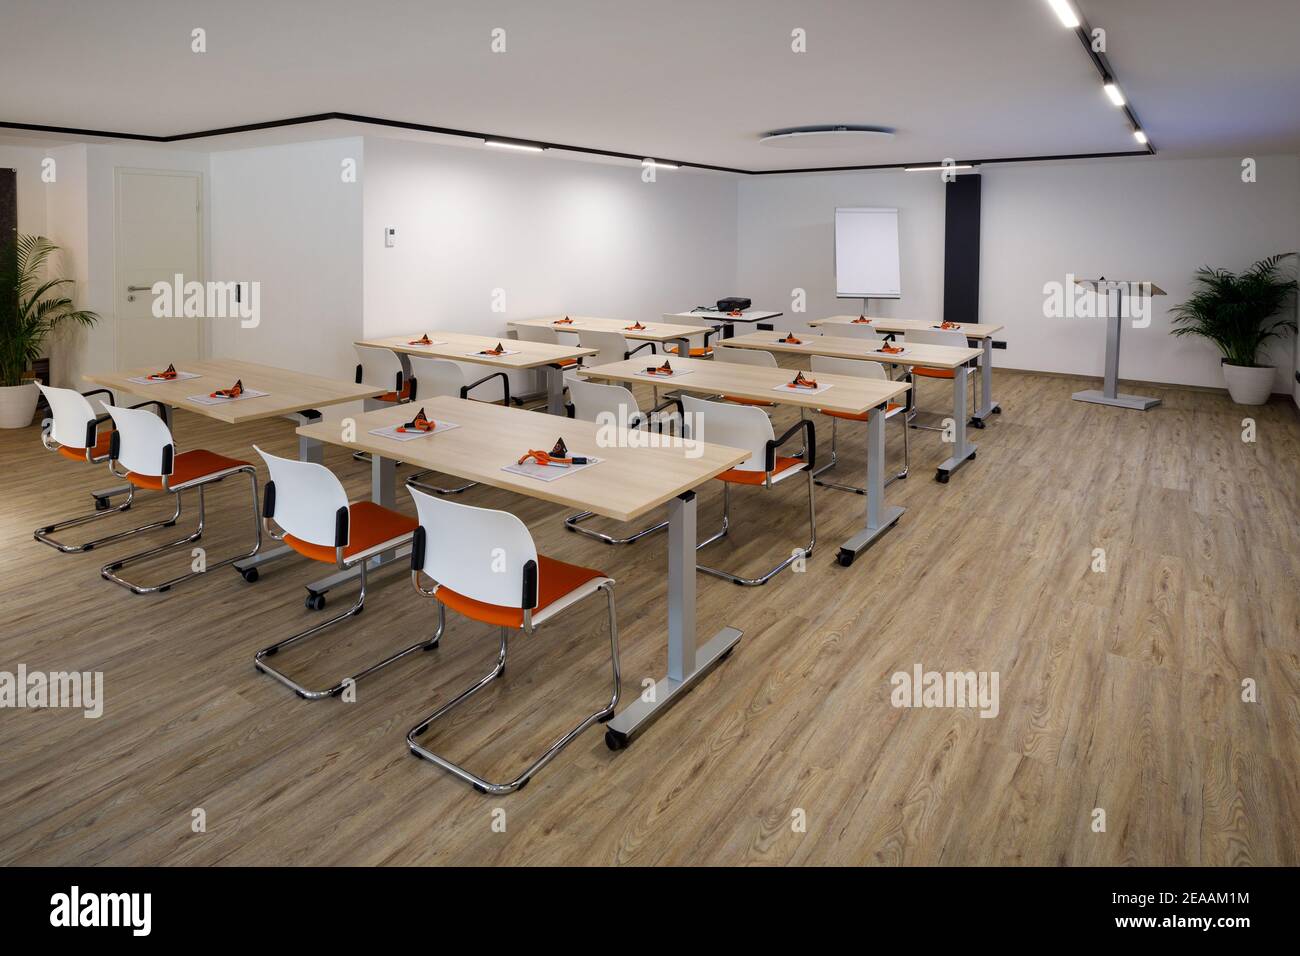 in a bright modern training room are chairs and benches Stock ...